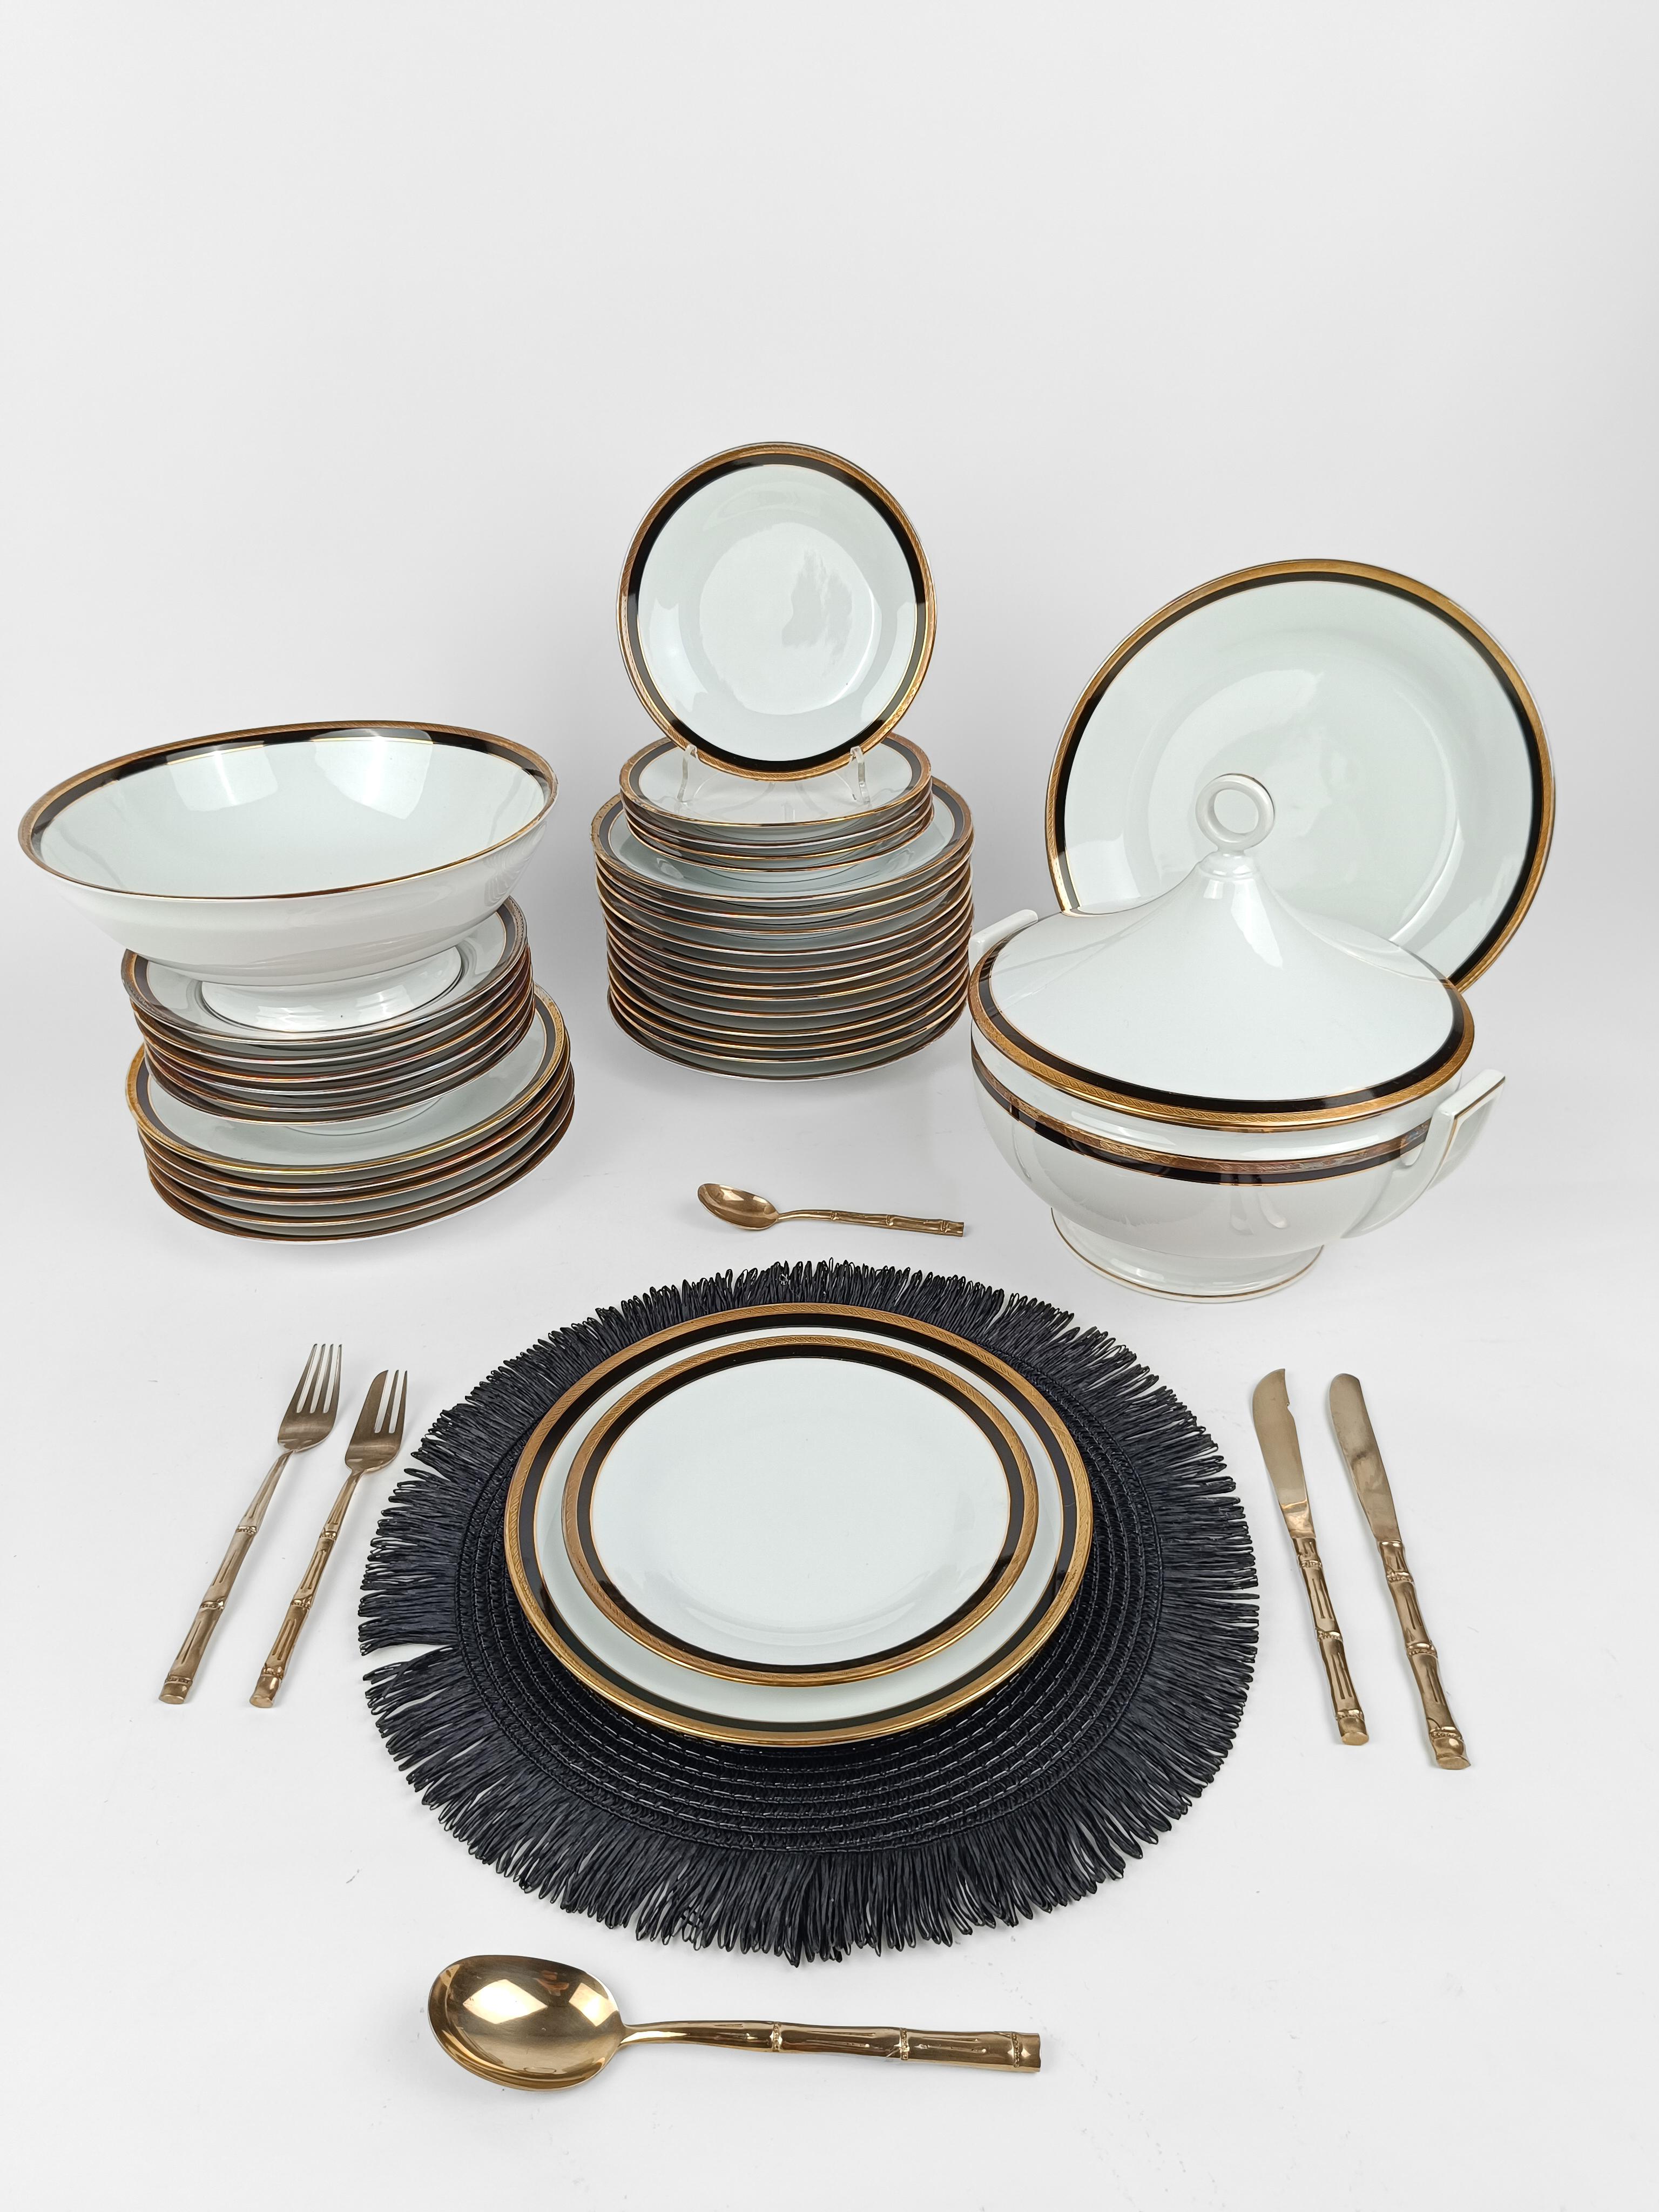 Empire China Dinner Service for 6 by Richard Ginori Black Onice Rim, Gold Trim & Verge For Sale